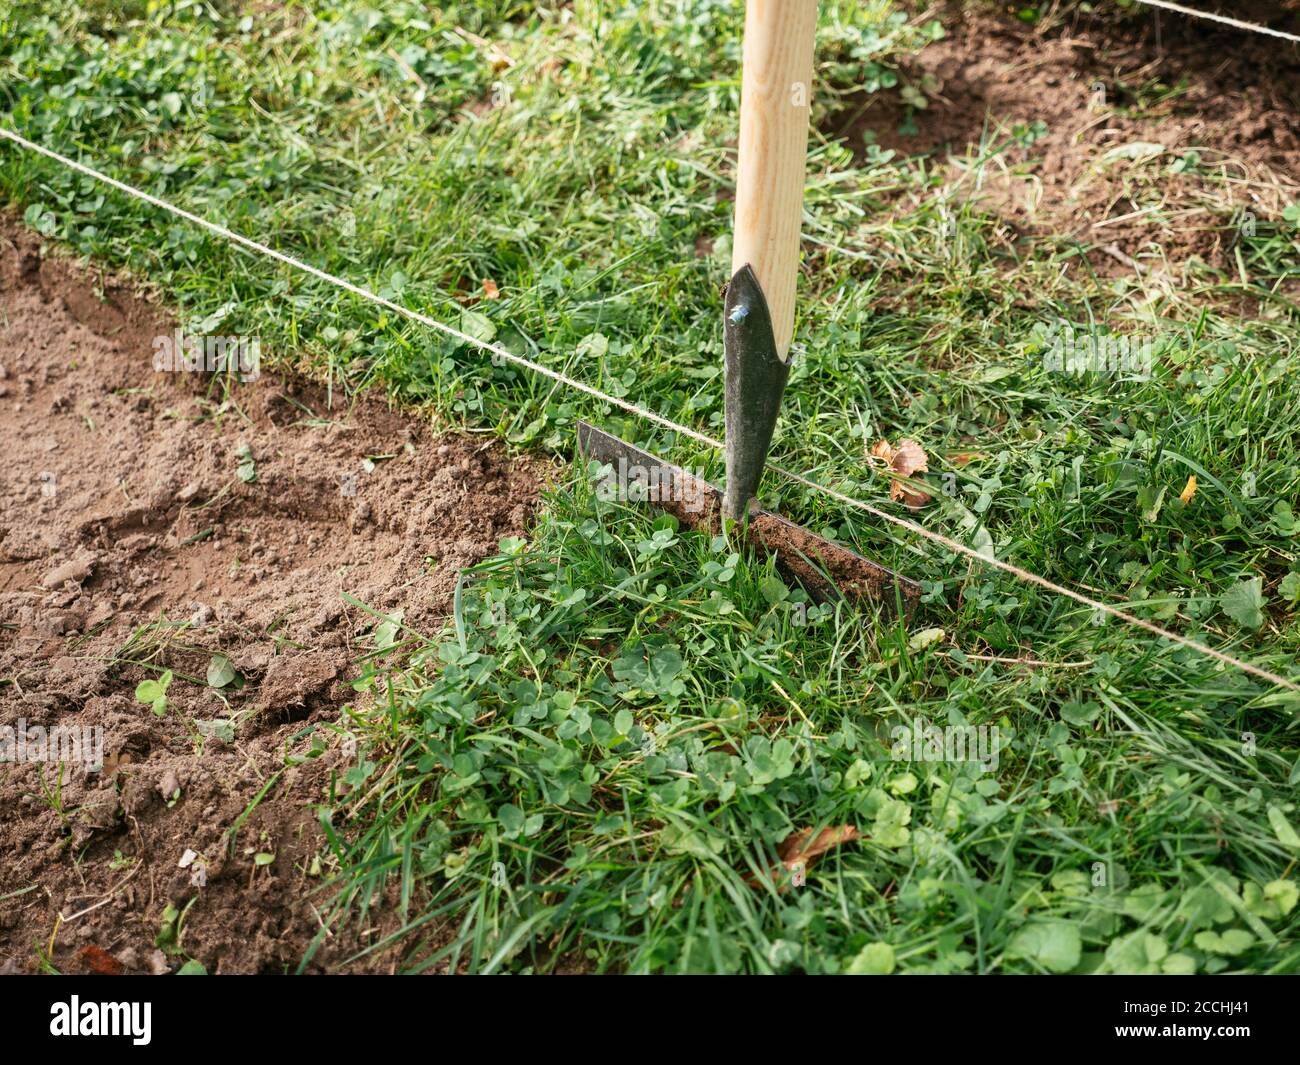 Edging a bed with a traditional hand made edging iron Stock Photo